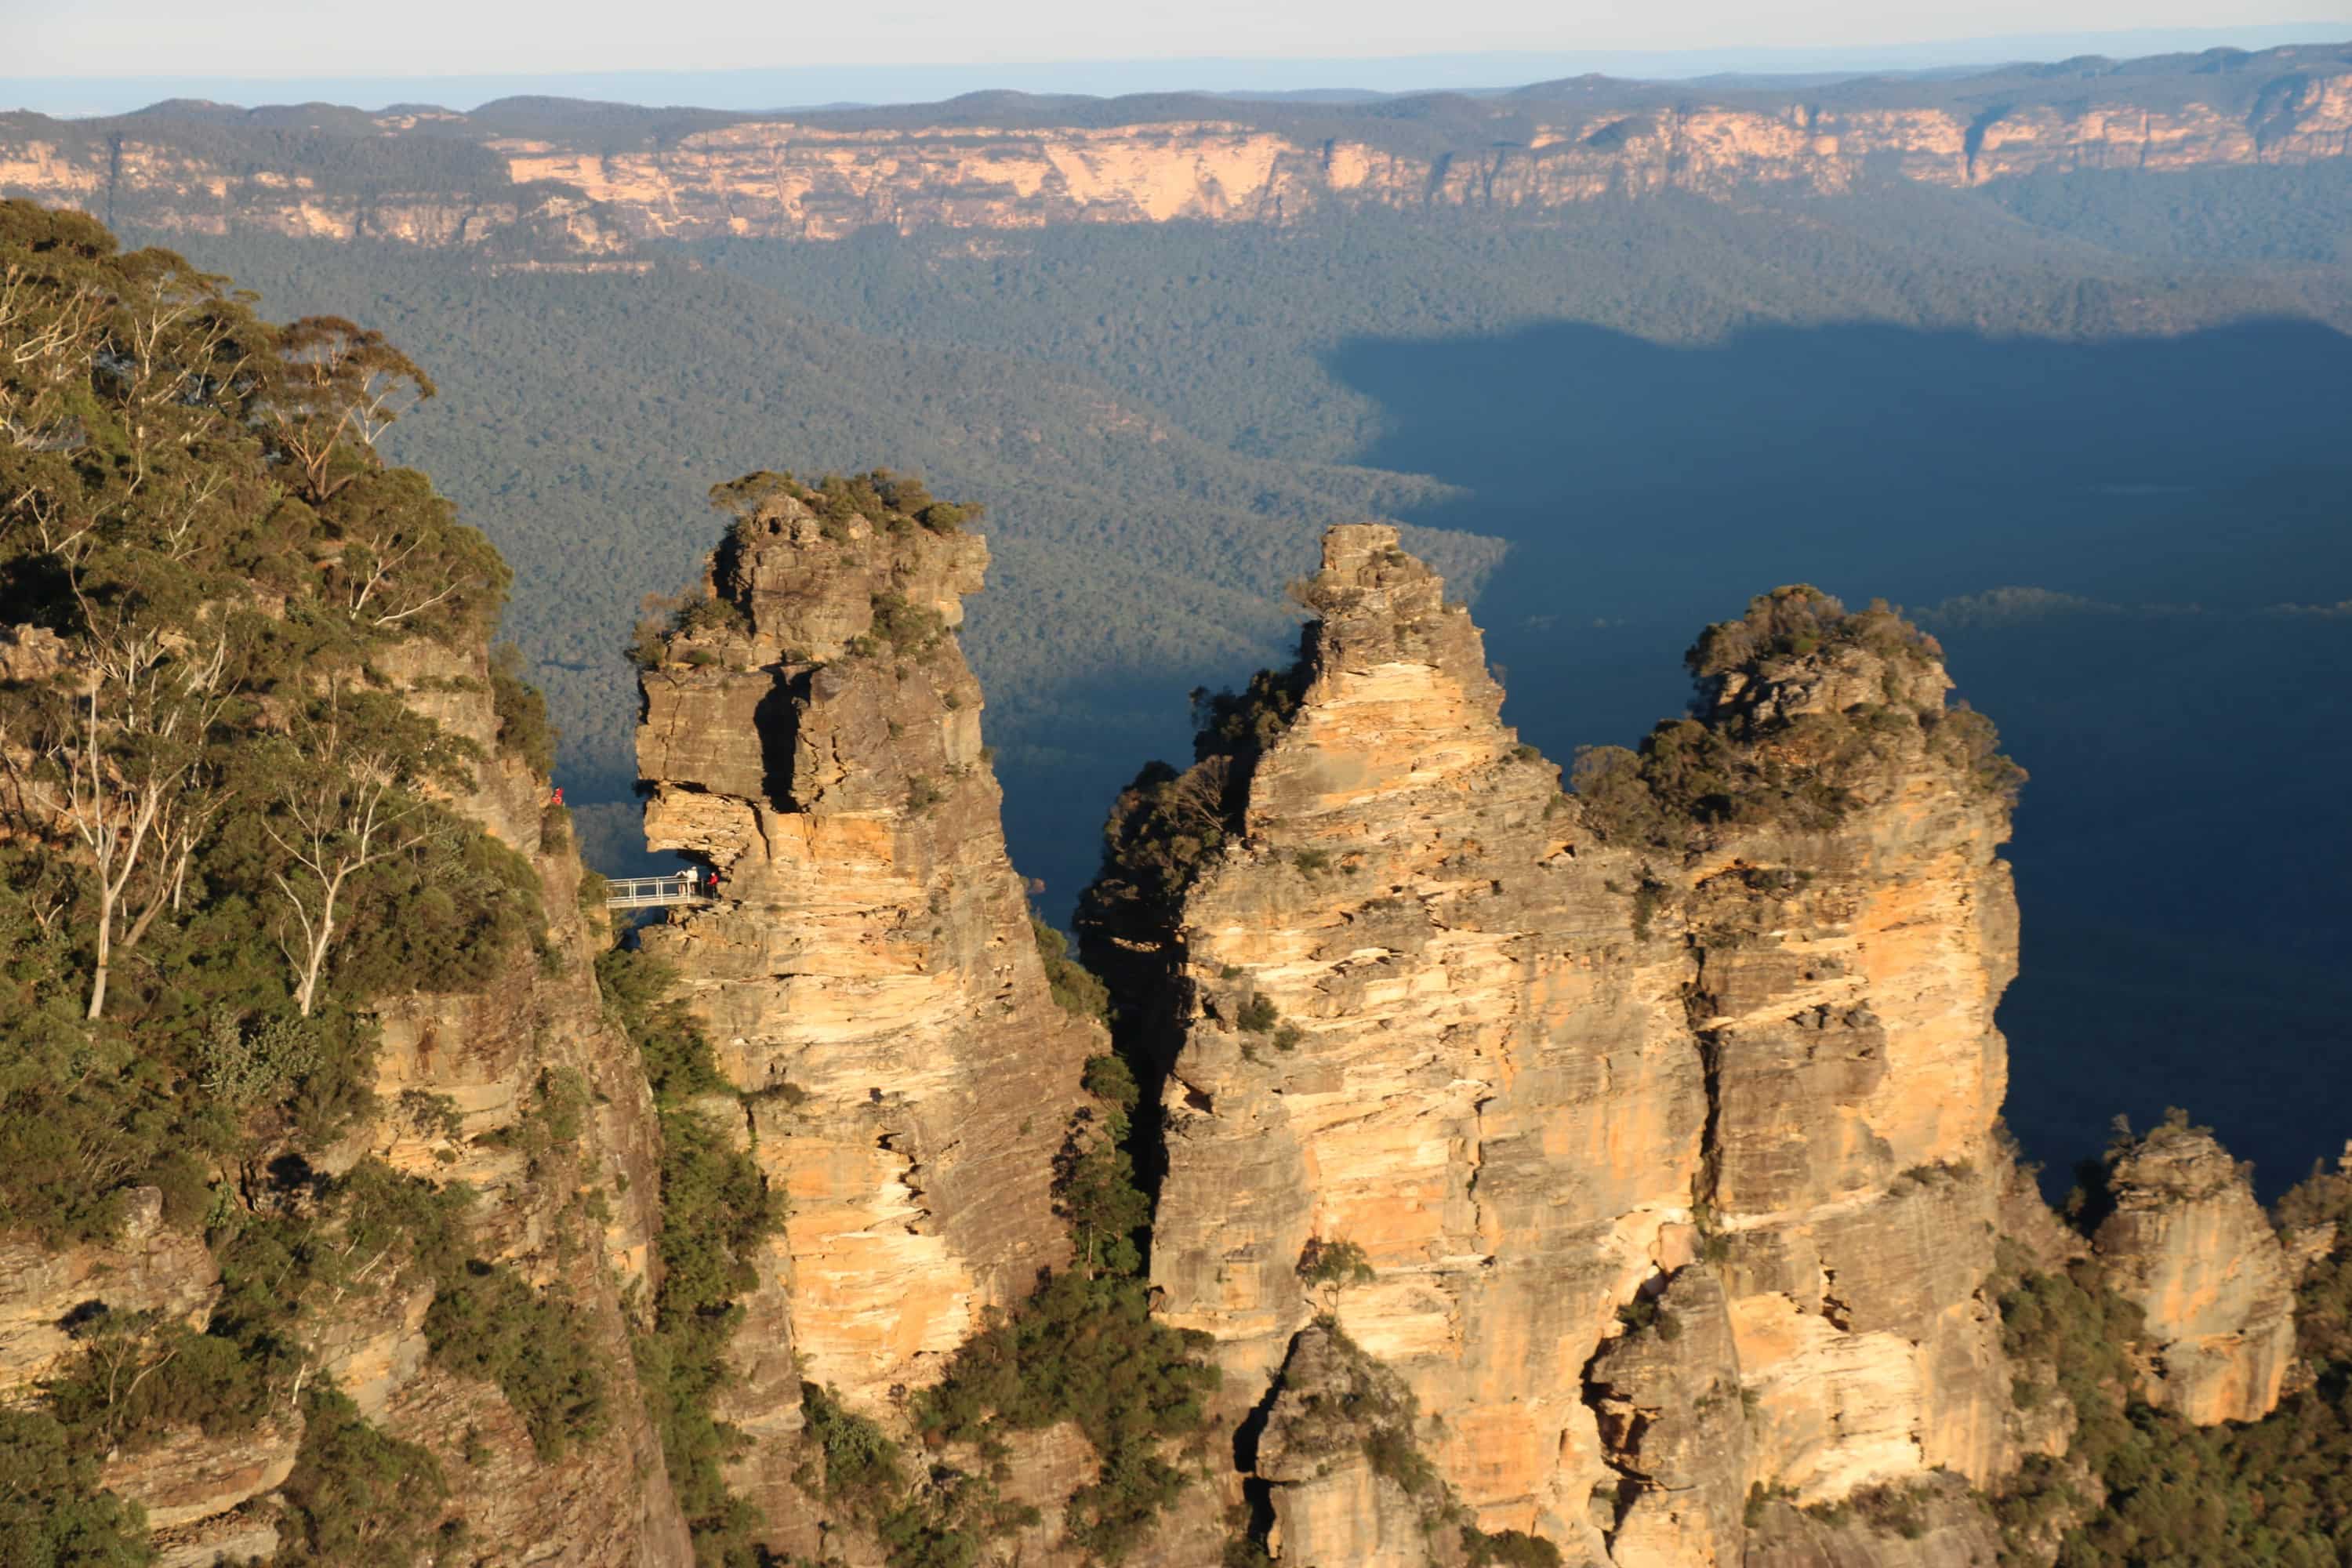 Three pointed sandstone rock formations jutting out from the cliff face